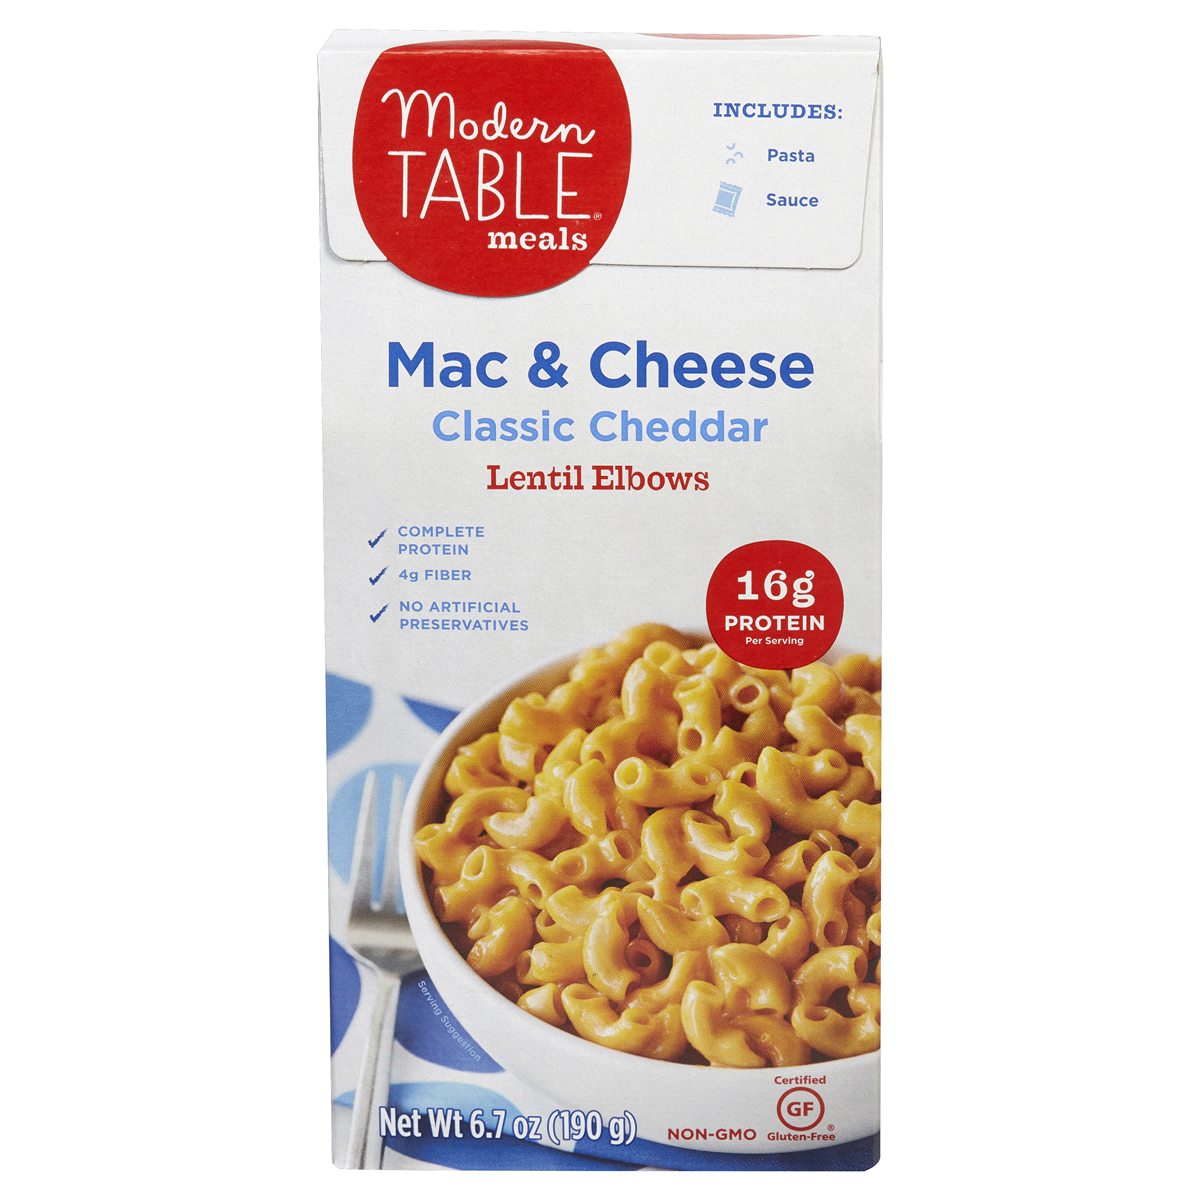 slide 1 of 2, Modern Table Meals Mac & Cheese Classic Cheddar Lentil Elbows, 6.7 oz